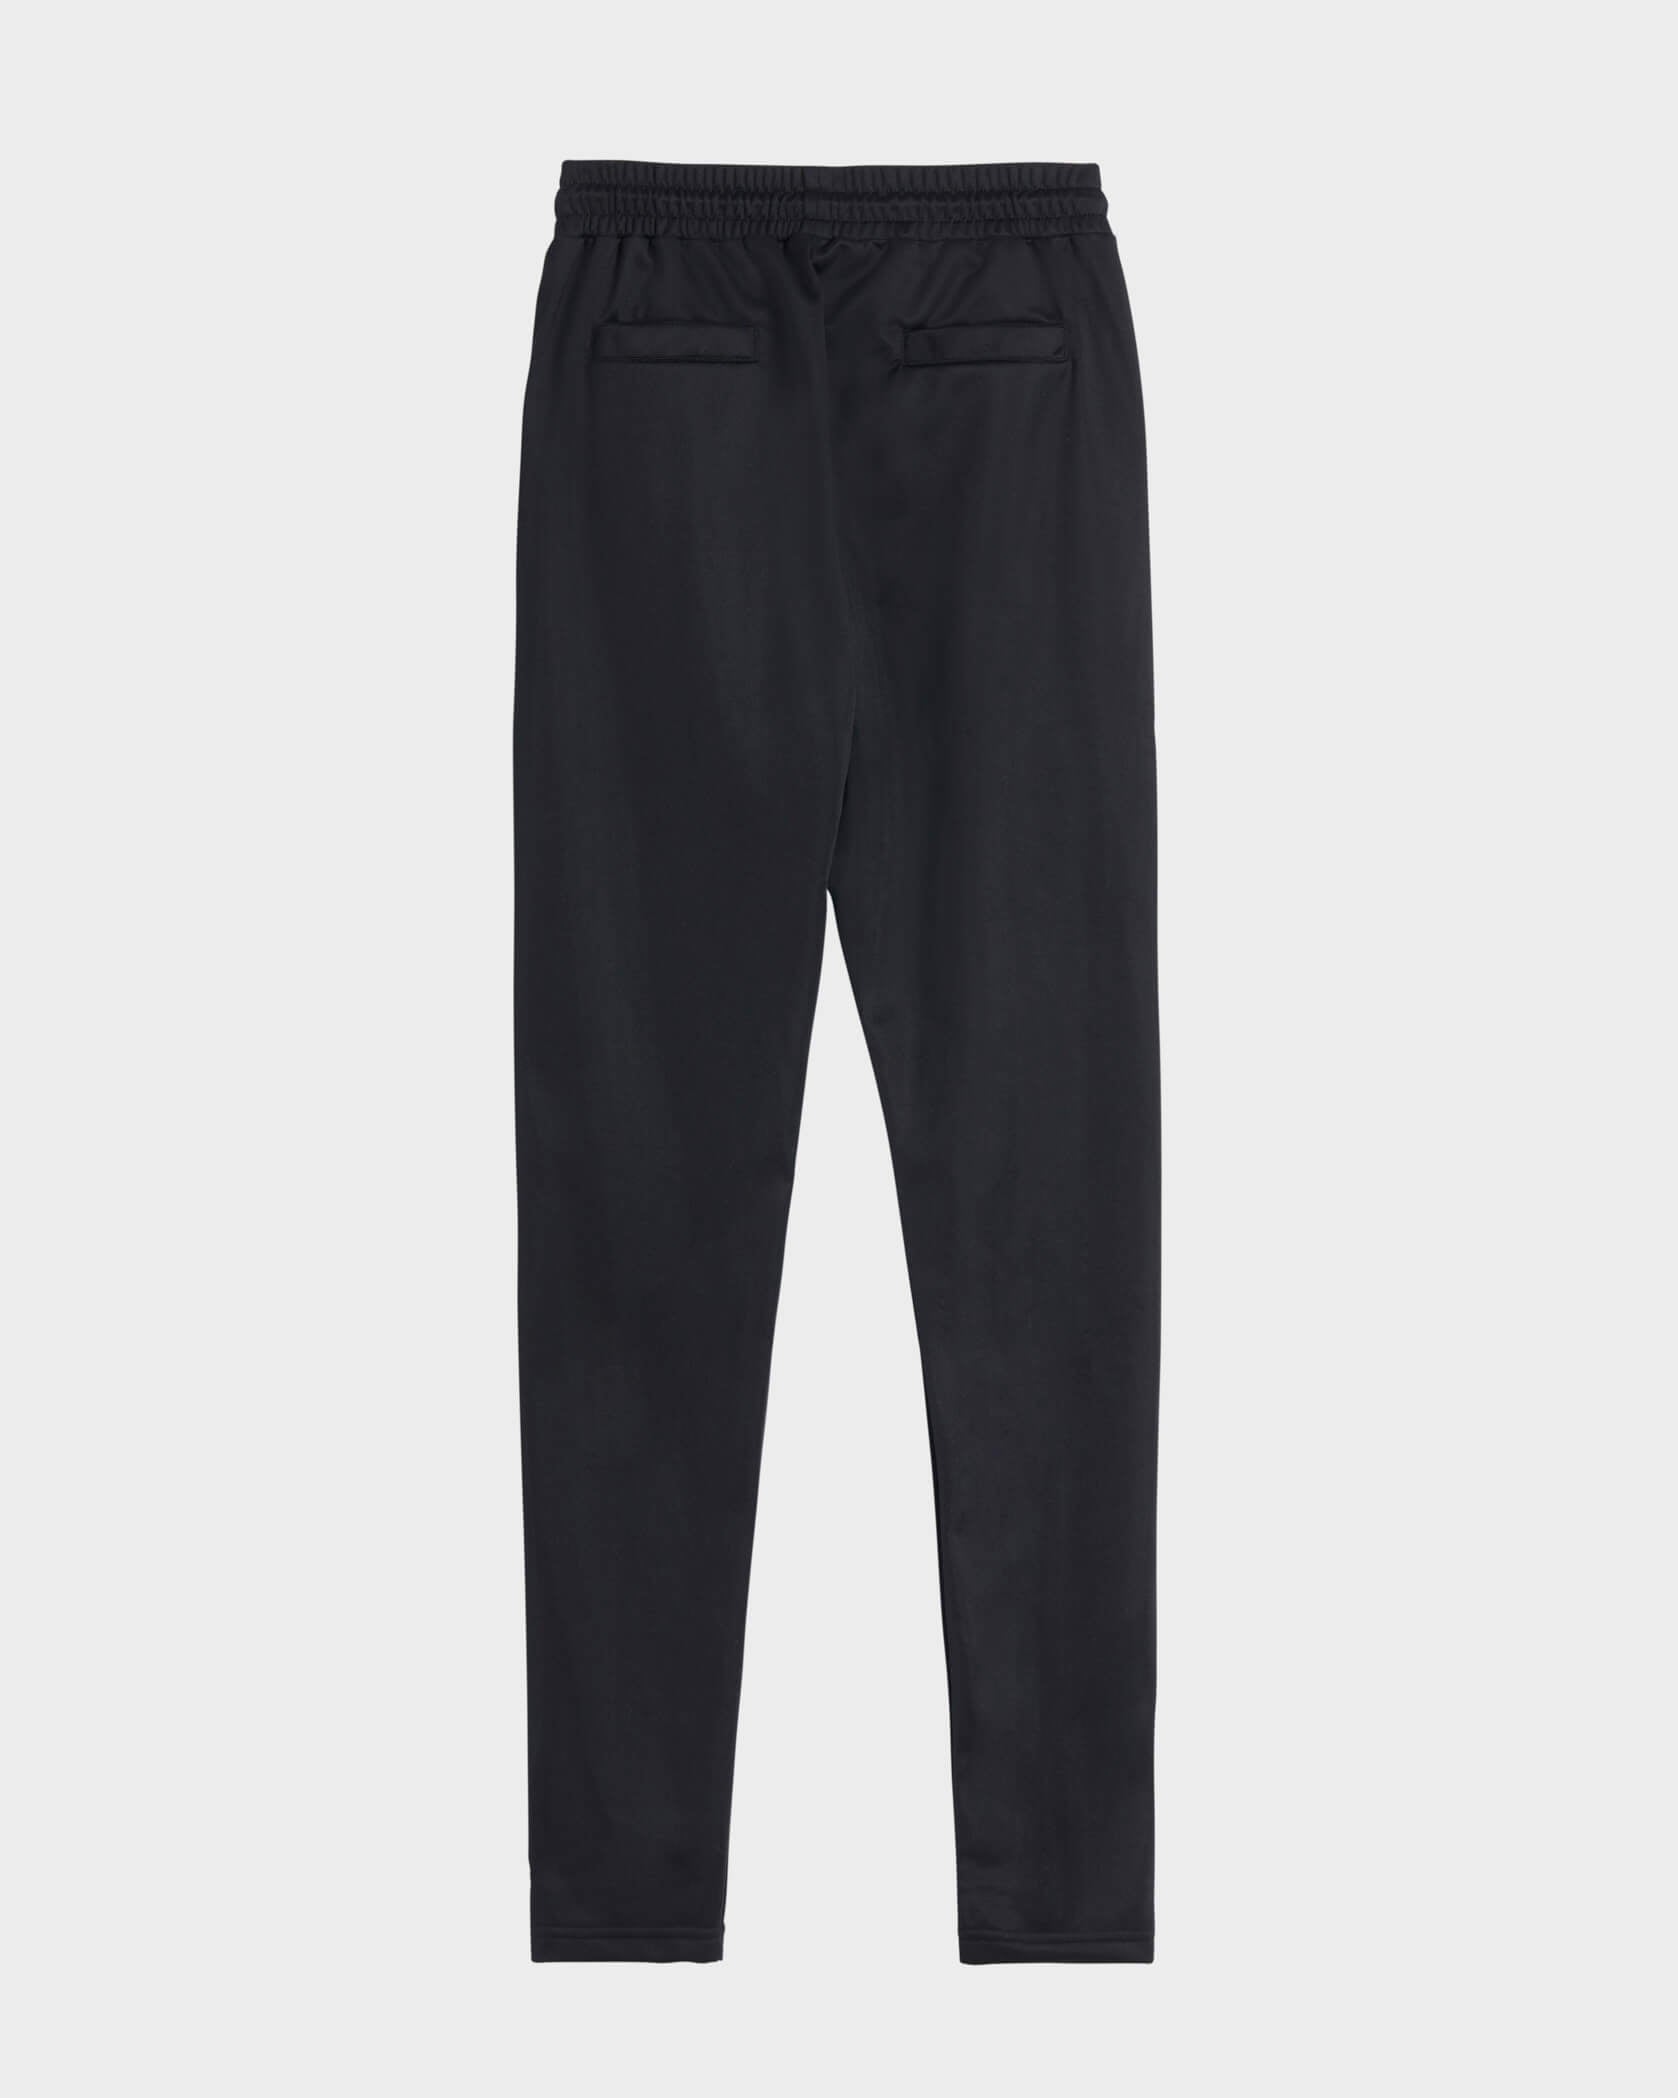 Twinzz Technical black track pant back